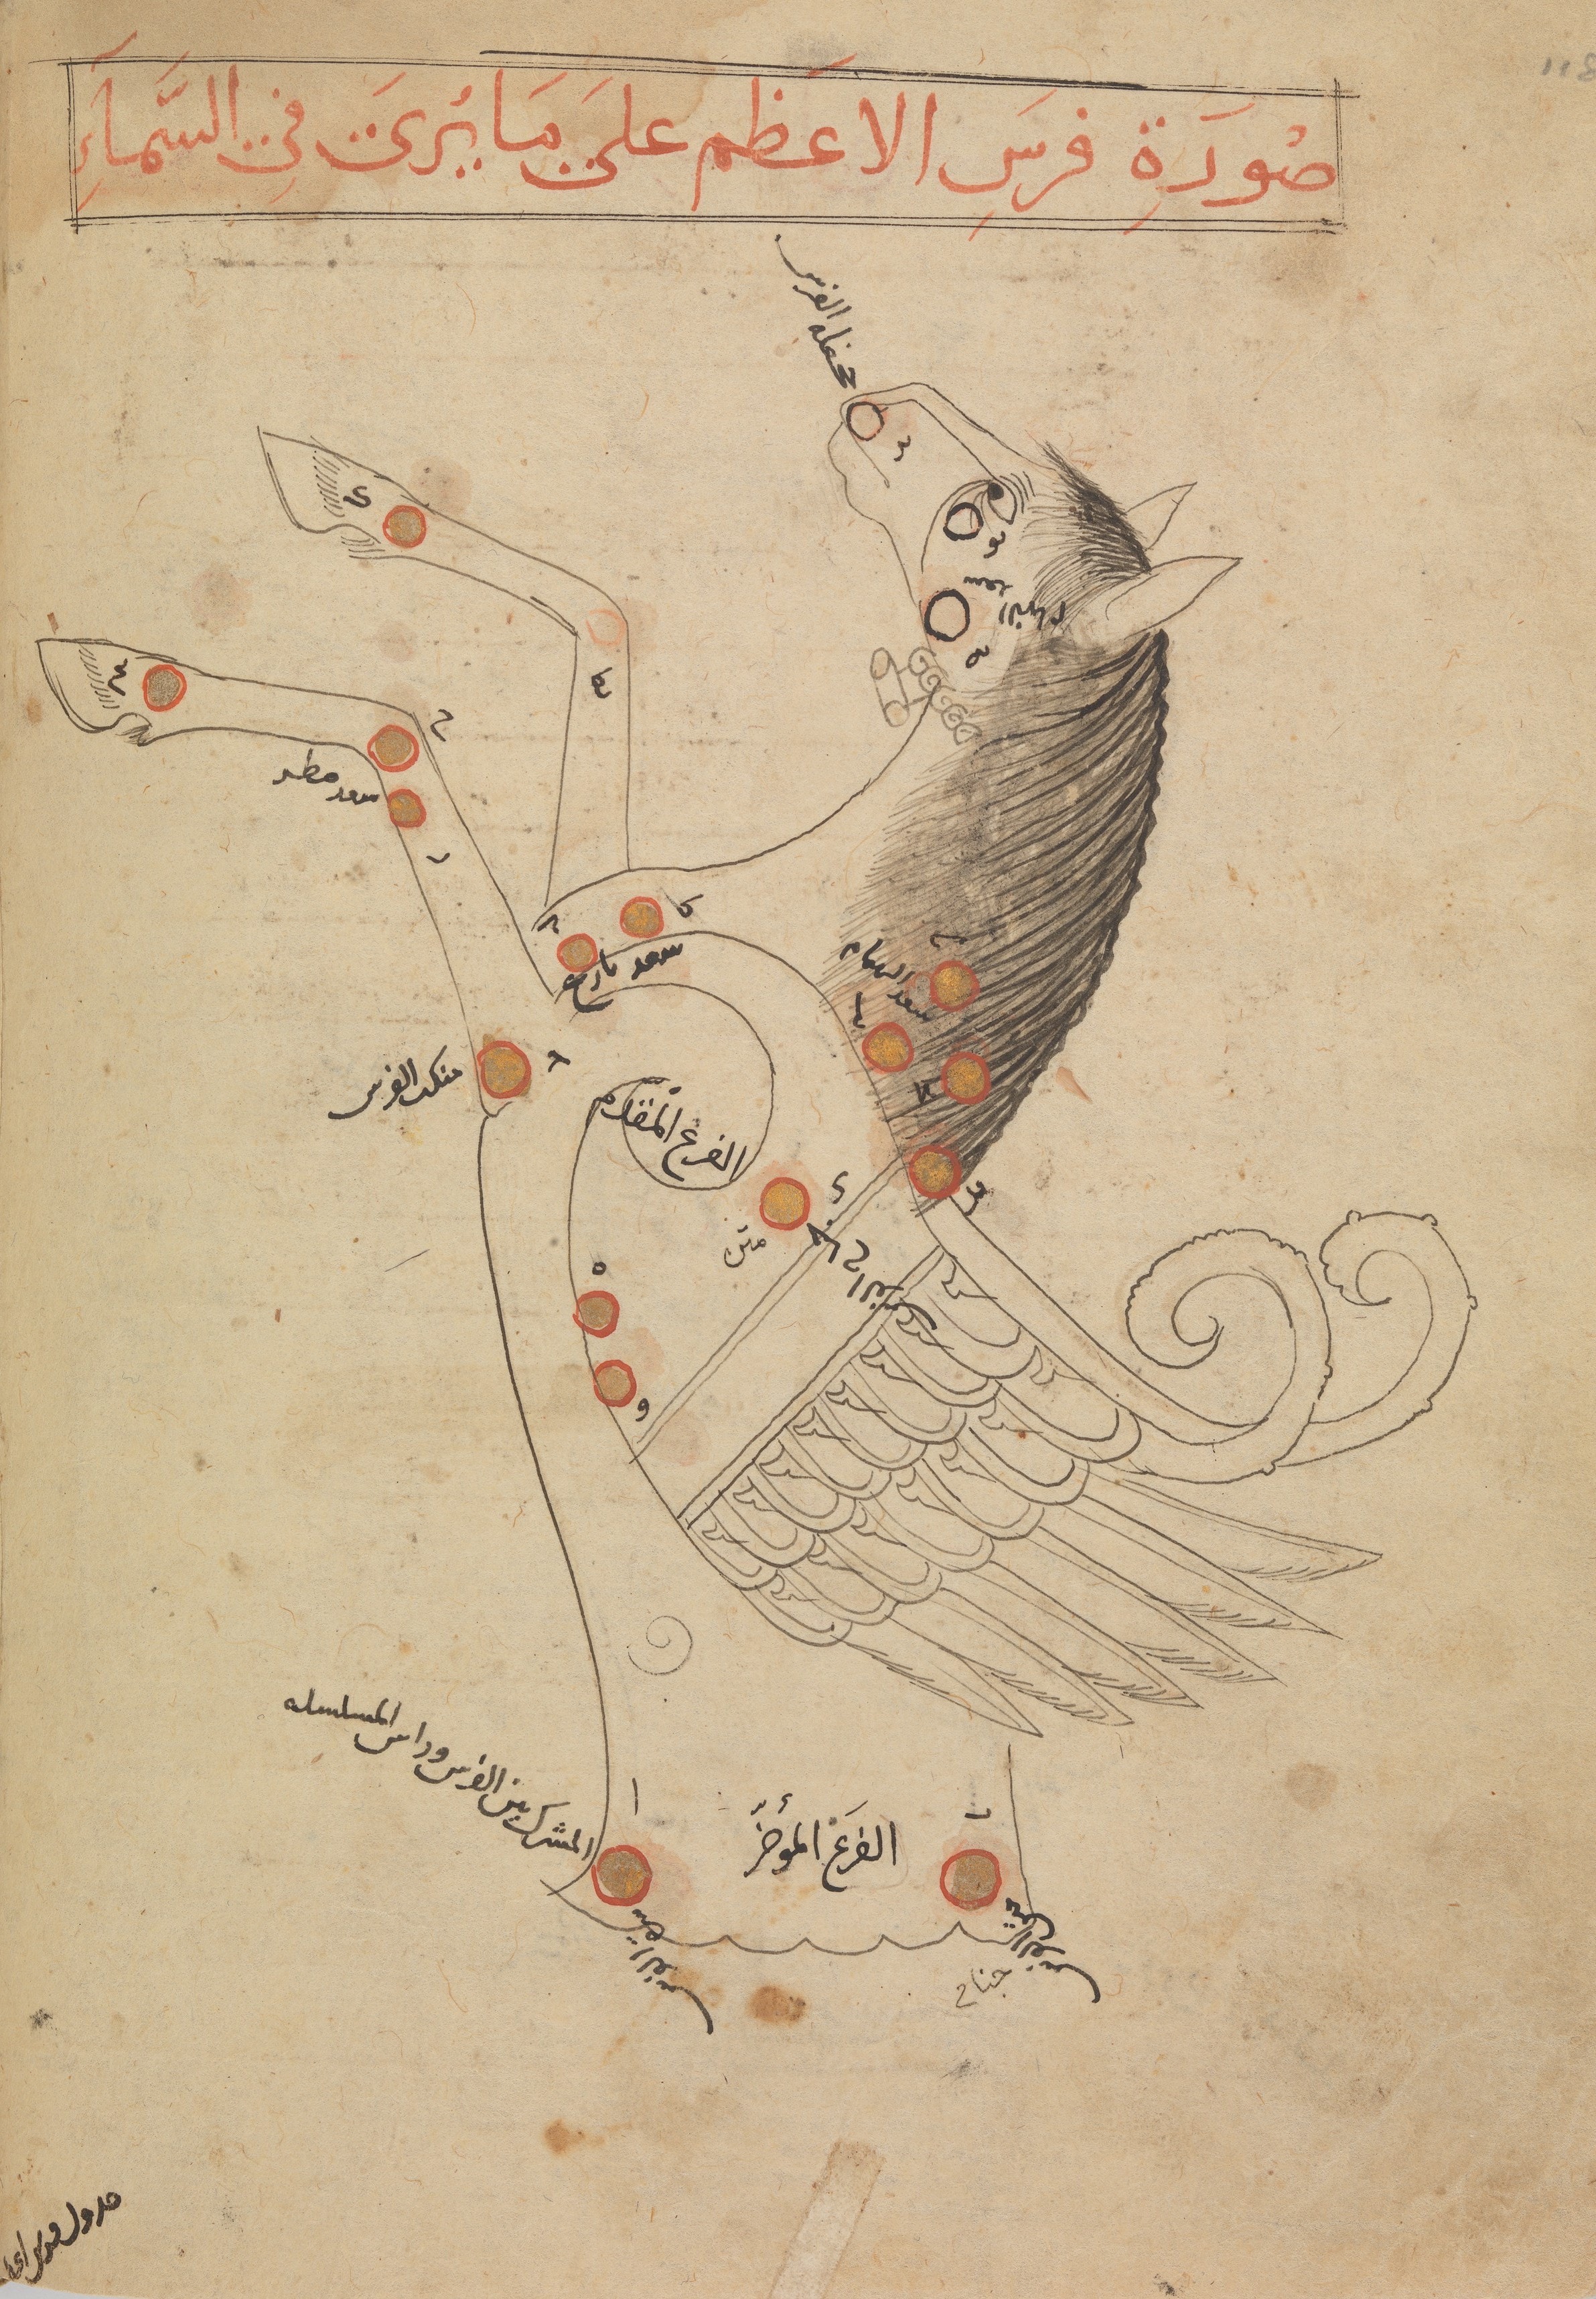 Constellation illustration of a winged horse with Arabic writing